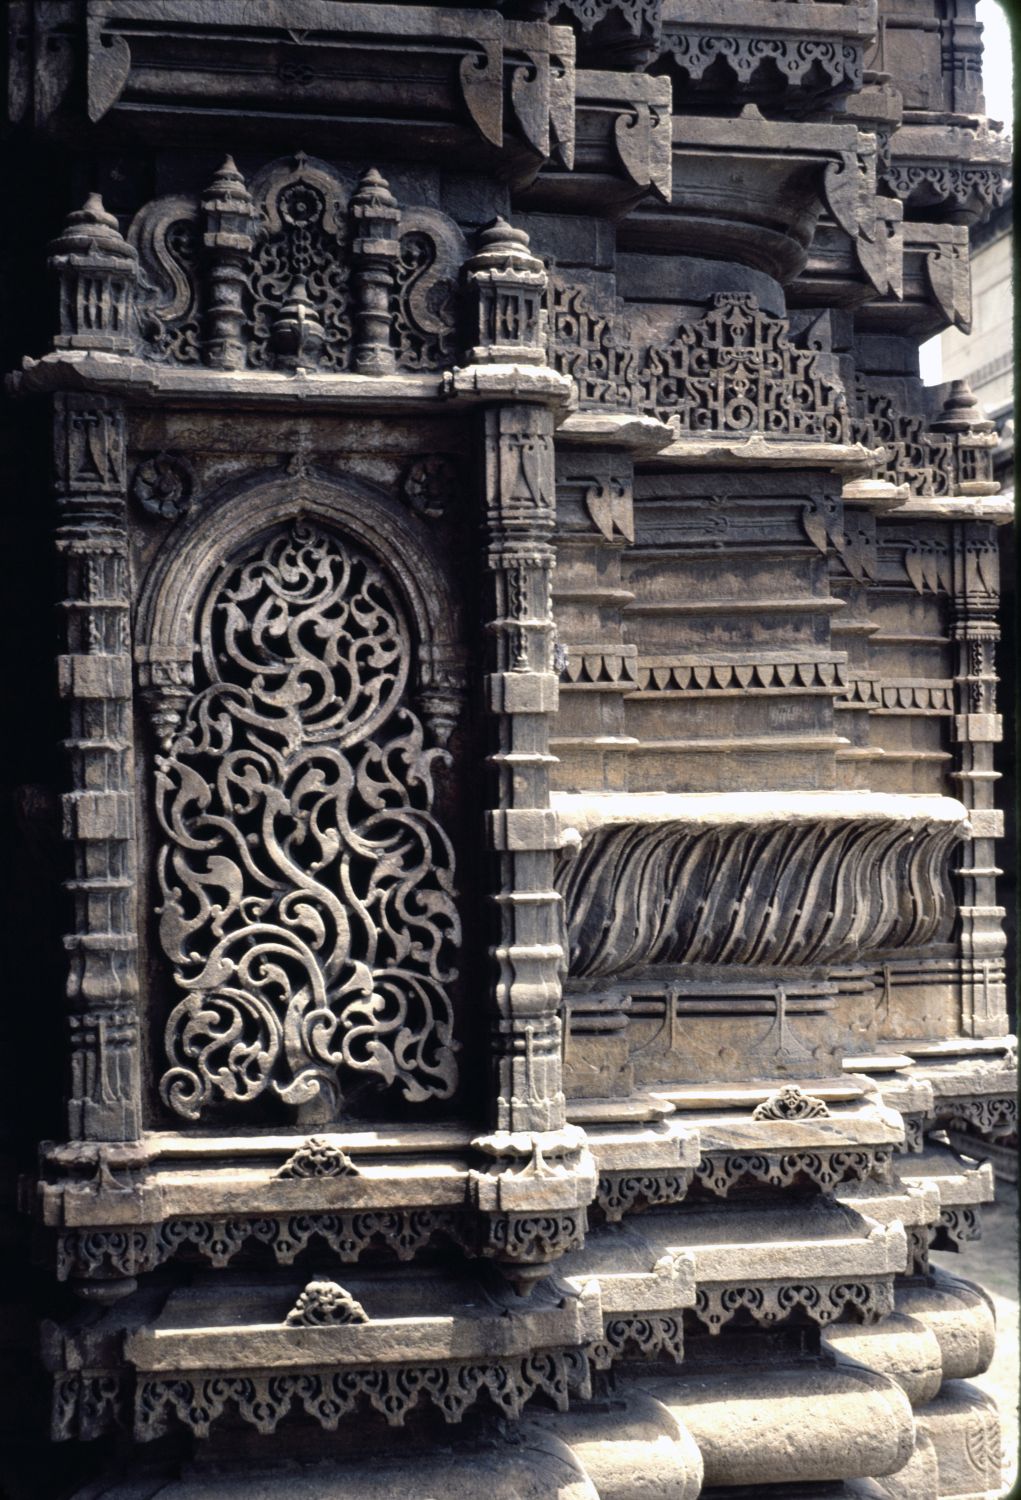 Detail view of minaret showing carved ornament.